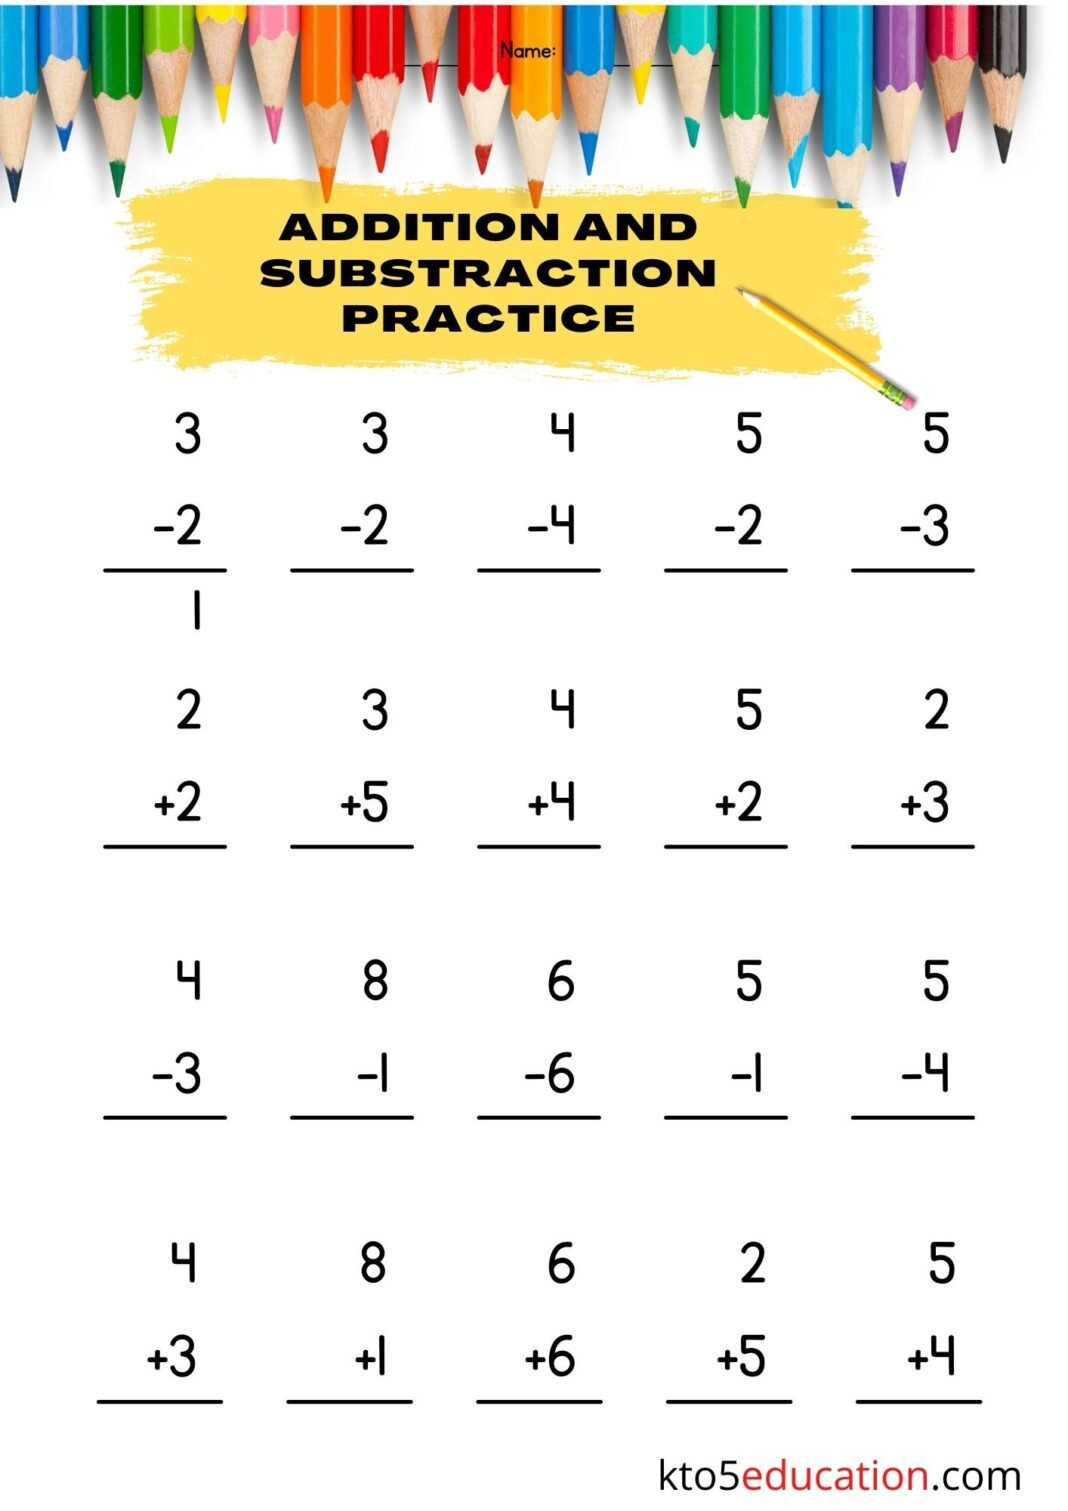 free-addition-fact-practice-worksheet-kto5education